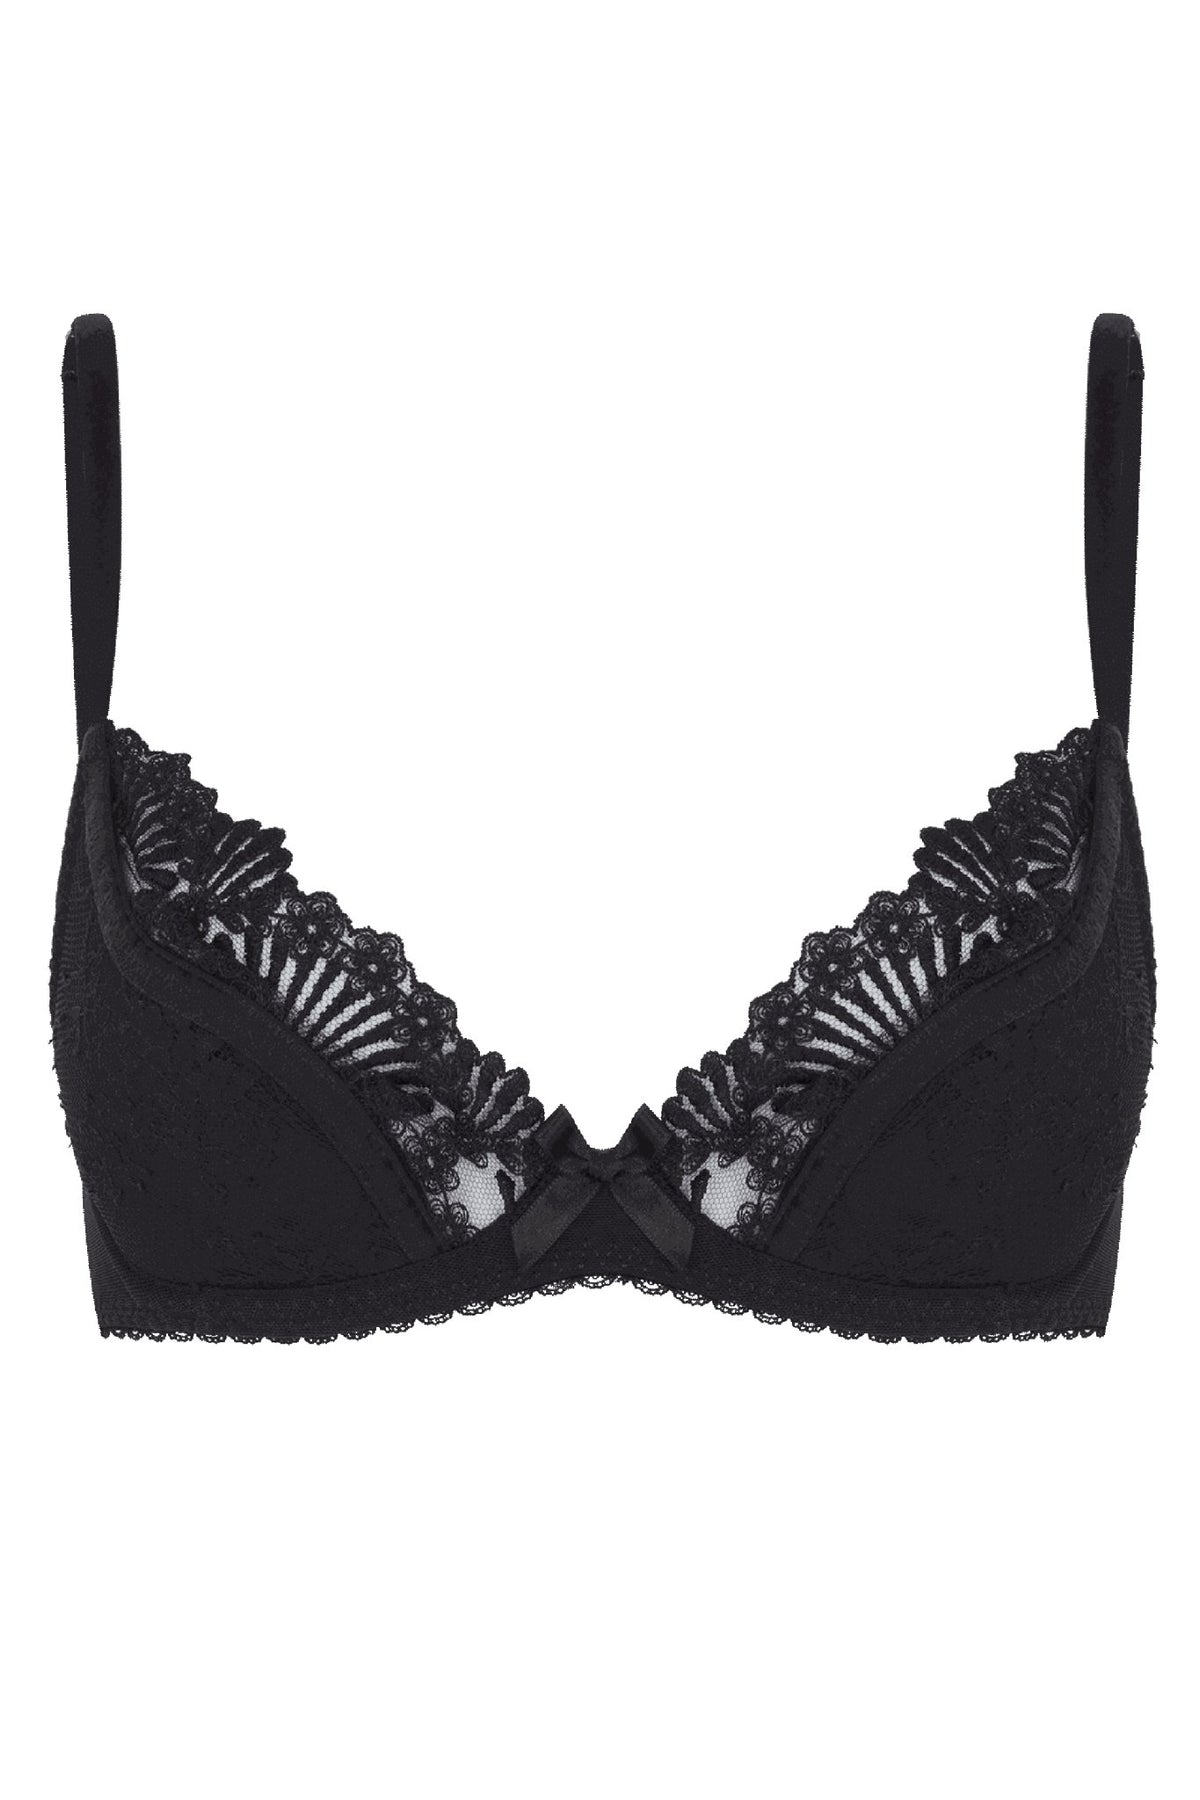 L'Agent by Agent Provocateur Bra - Lucila Padded Push-Up